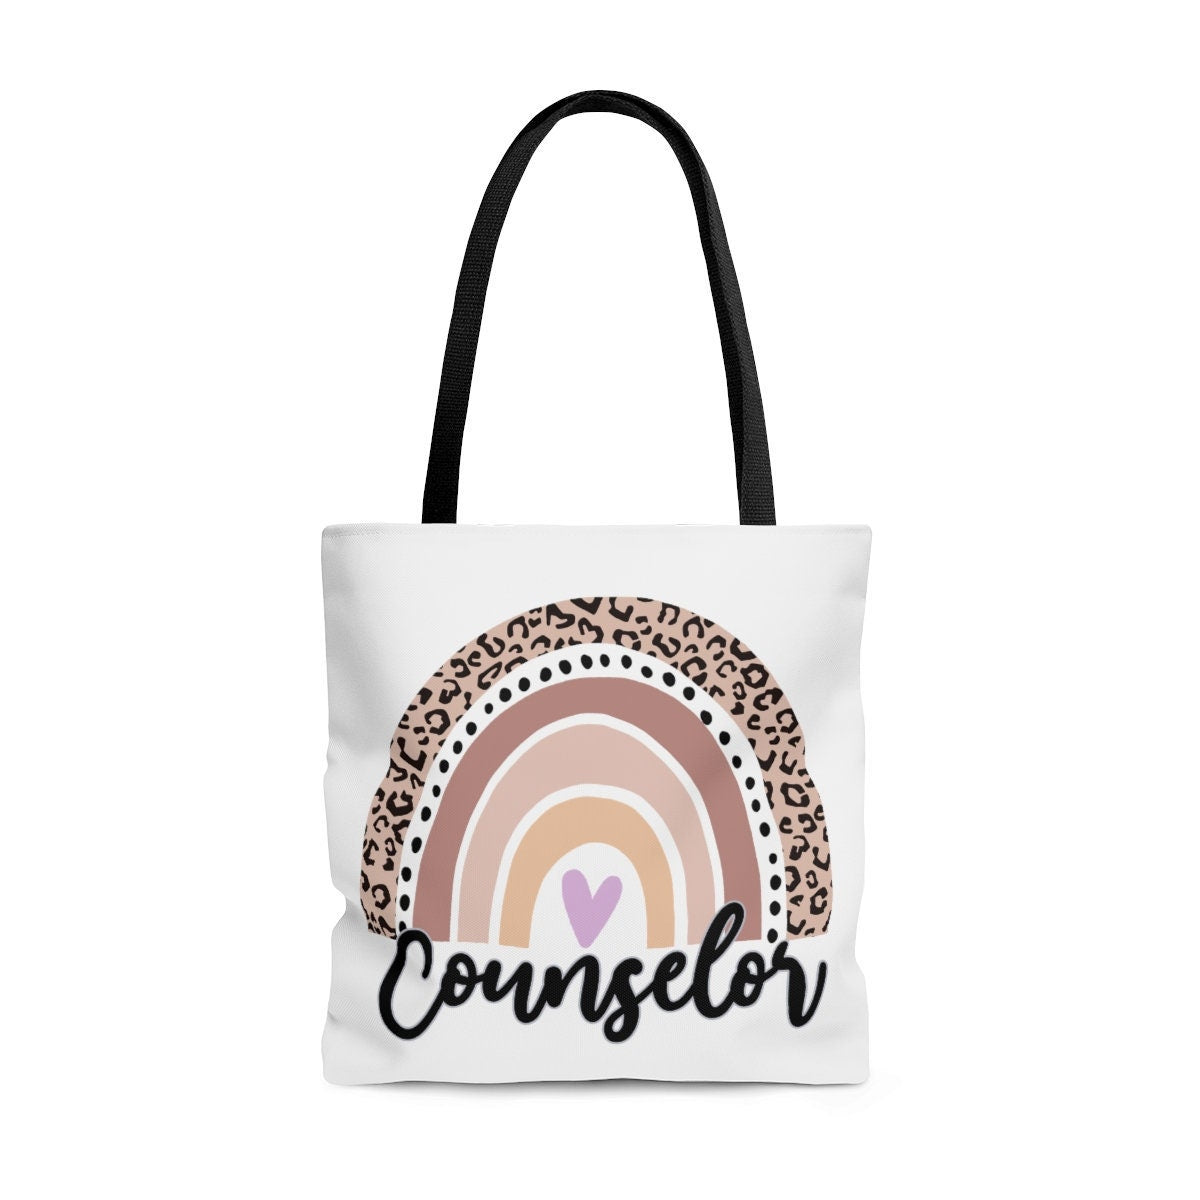 School Counselor Tote Bag, Mental Therapist Shopping Bag, Boho Rainbow Grocery Bag, Counseling Tote Bag, Leopard Rainbow Bag, Counsel Bag